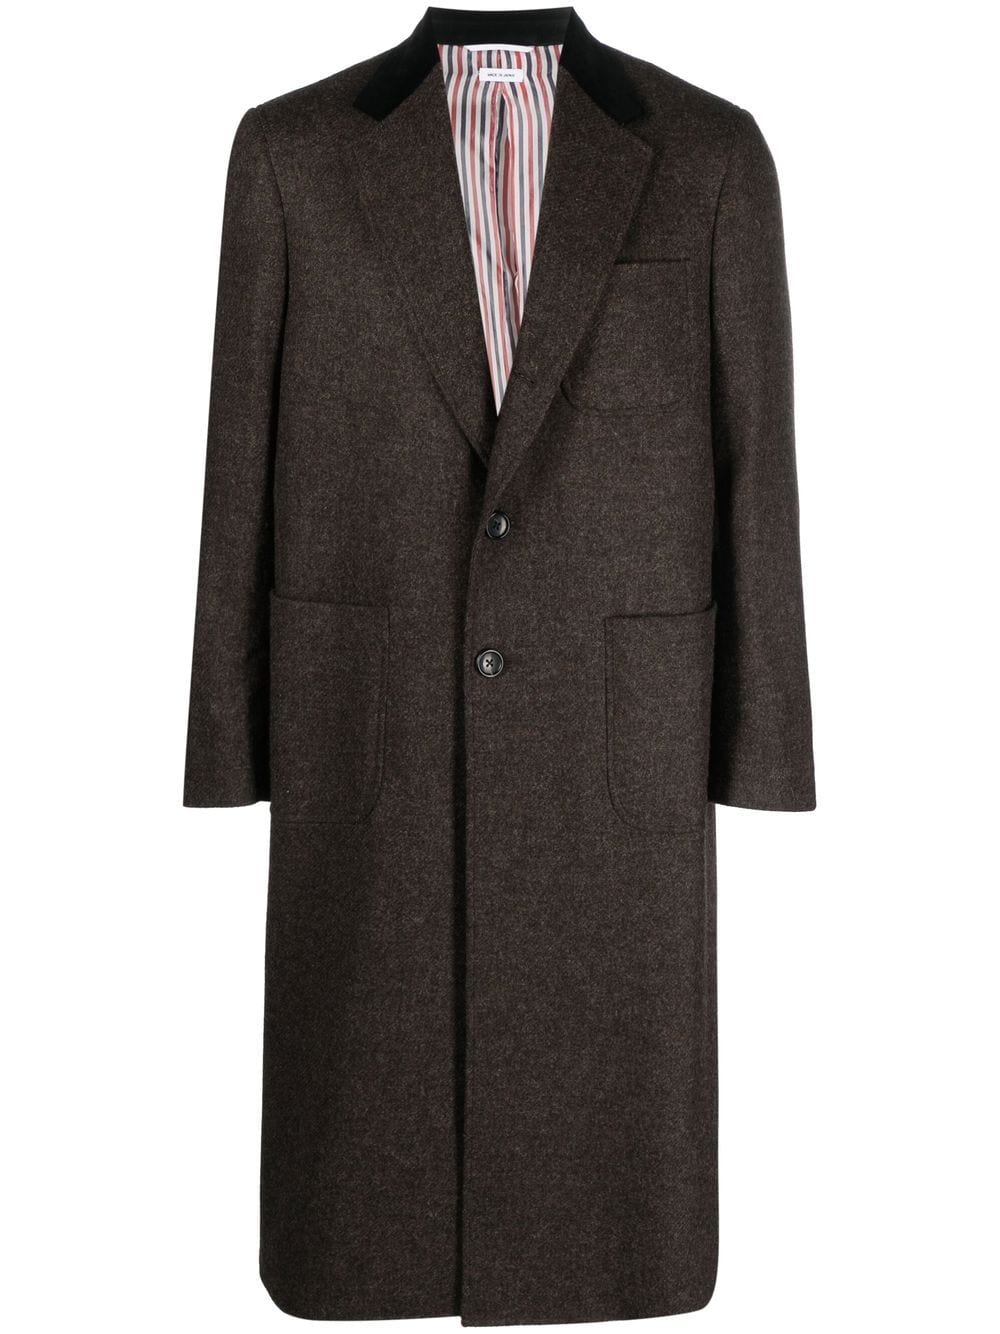 Thom Browne elongated single-breasted button coat von Thom Browne